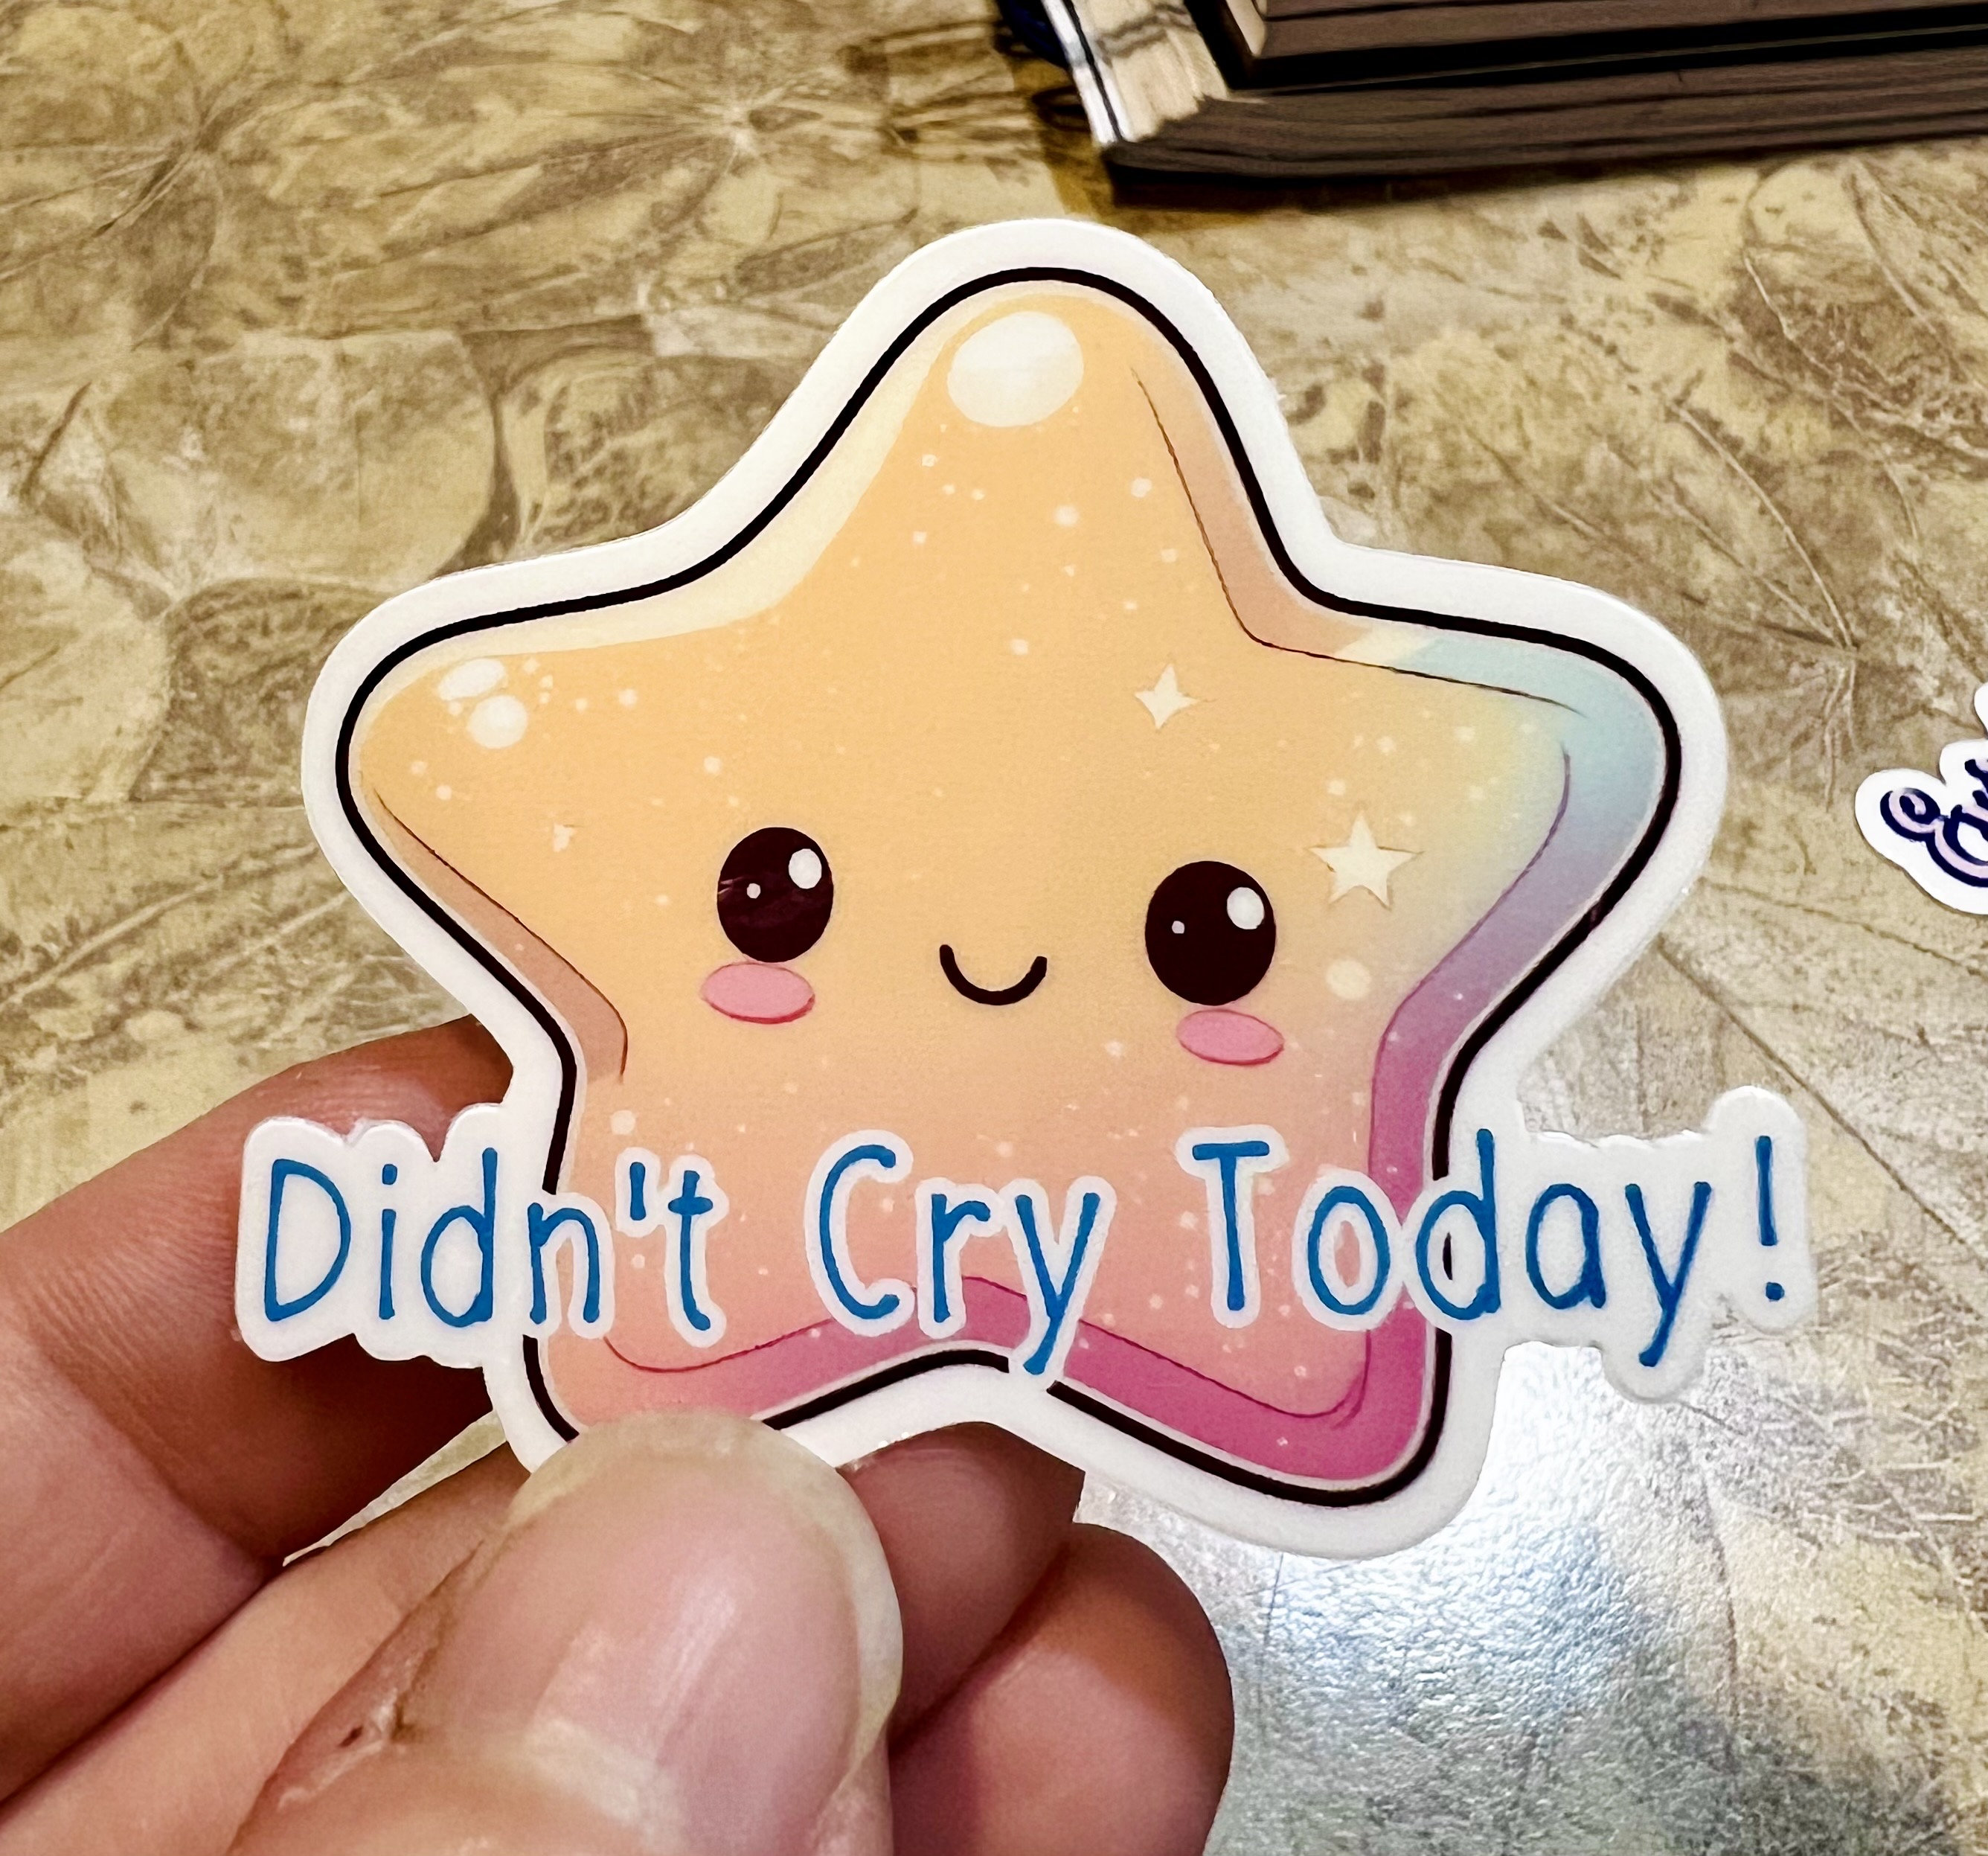 Sarcastic Gold Star Sticker Pack Sticker for Sale by BubbleArt21